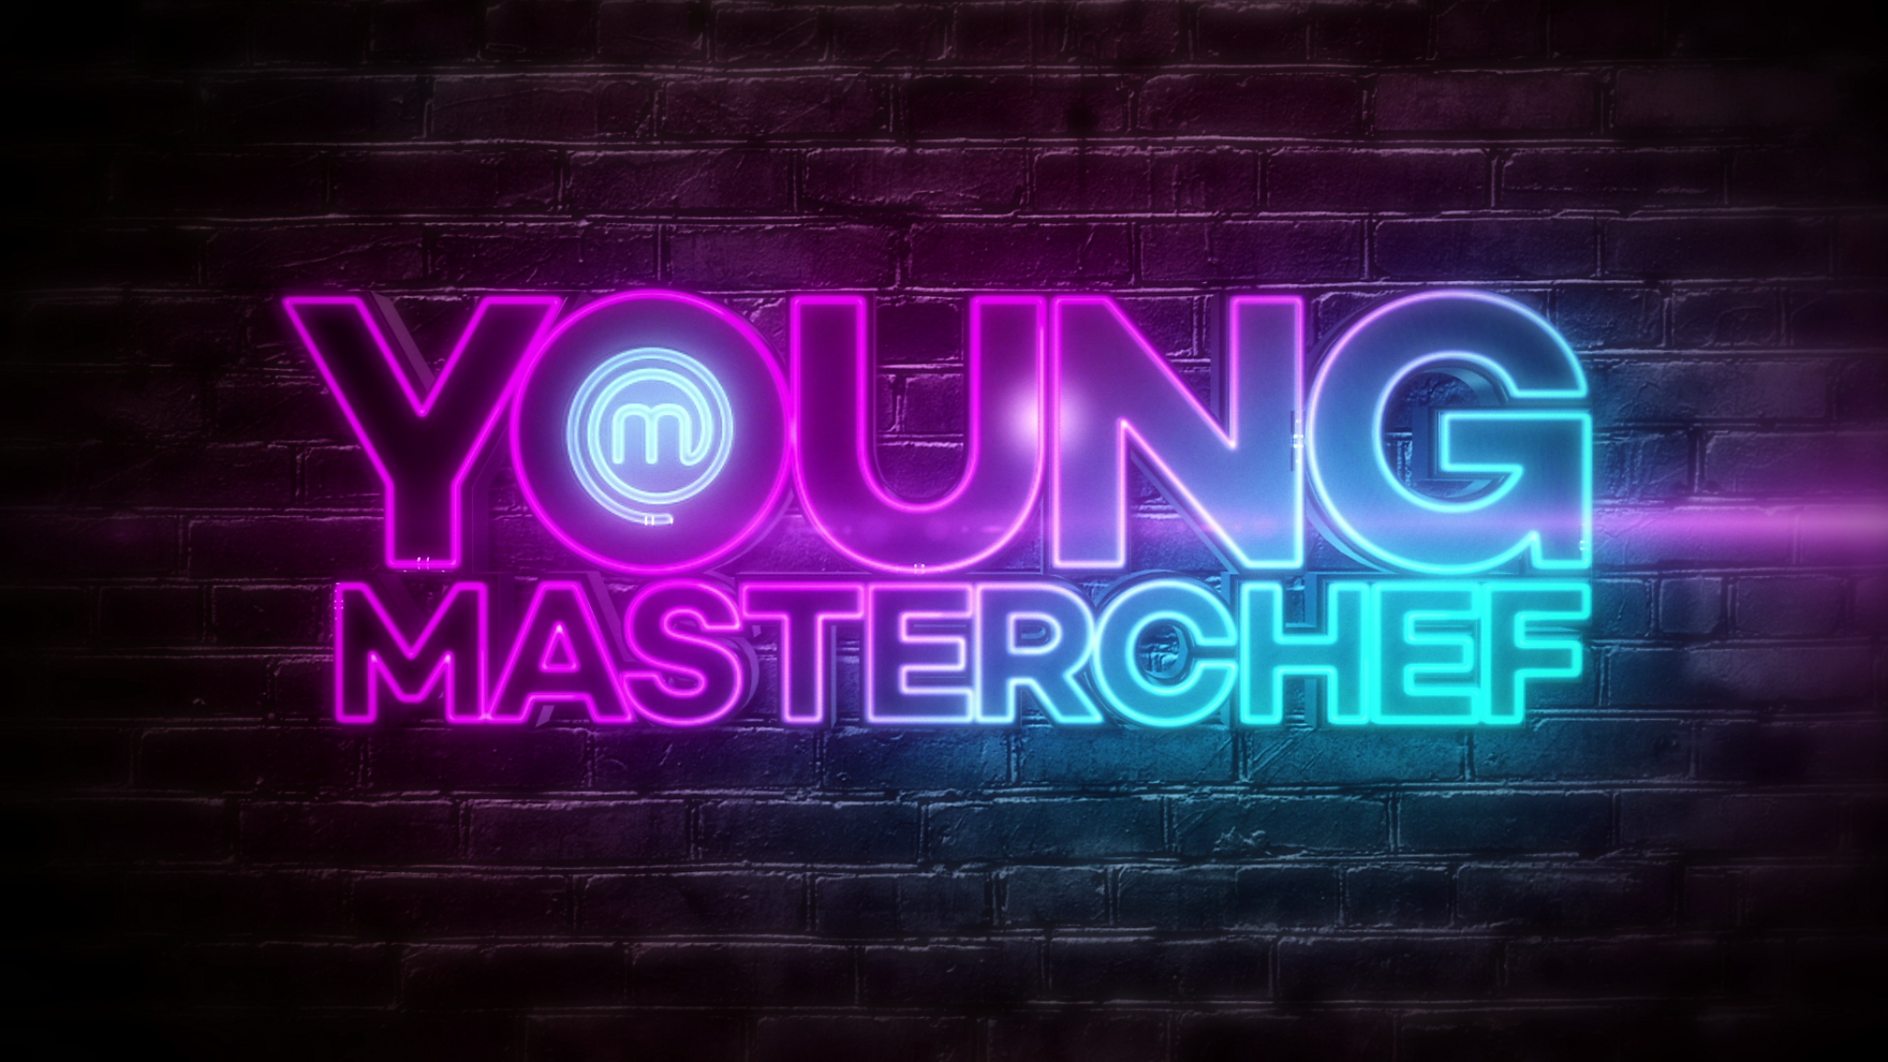 Young MasterChef returns for Series 2 on BBC Three and BBC iPlayer